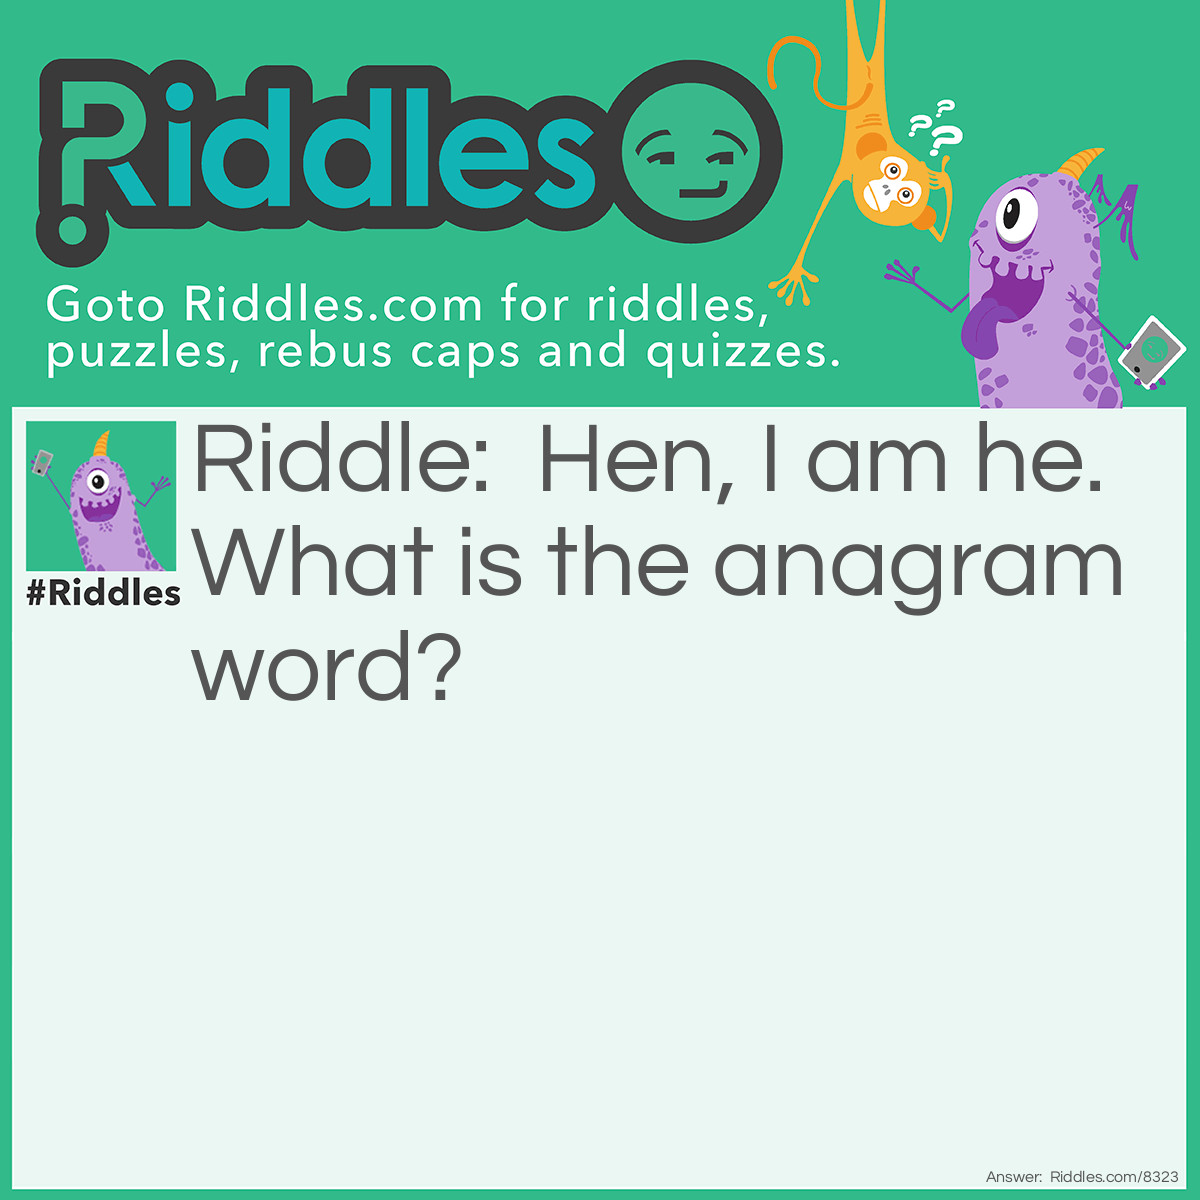 Riddle: Hen, I am he. What is the anagrammed  word? Answer: Nehemiah.